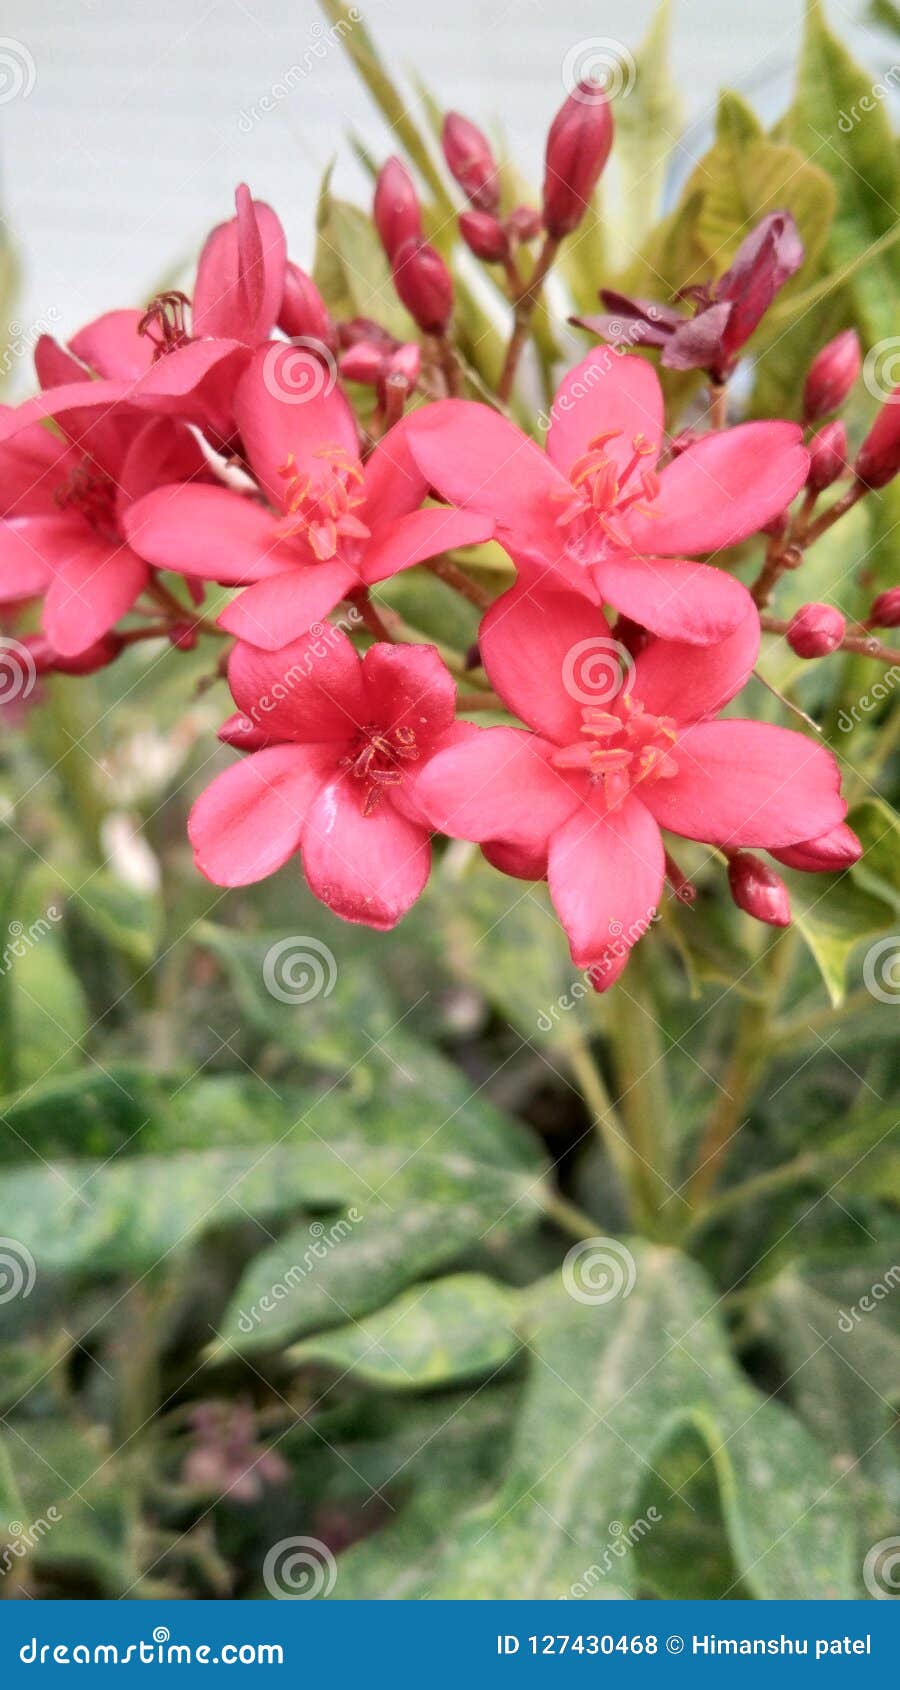 Red Flowers in garden stock photo. Image of buautiful - 127430468